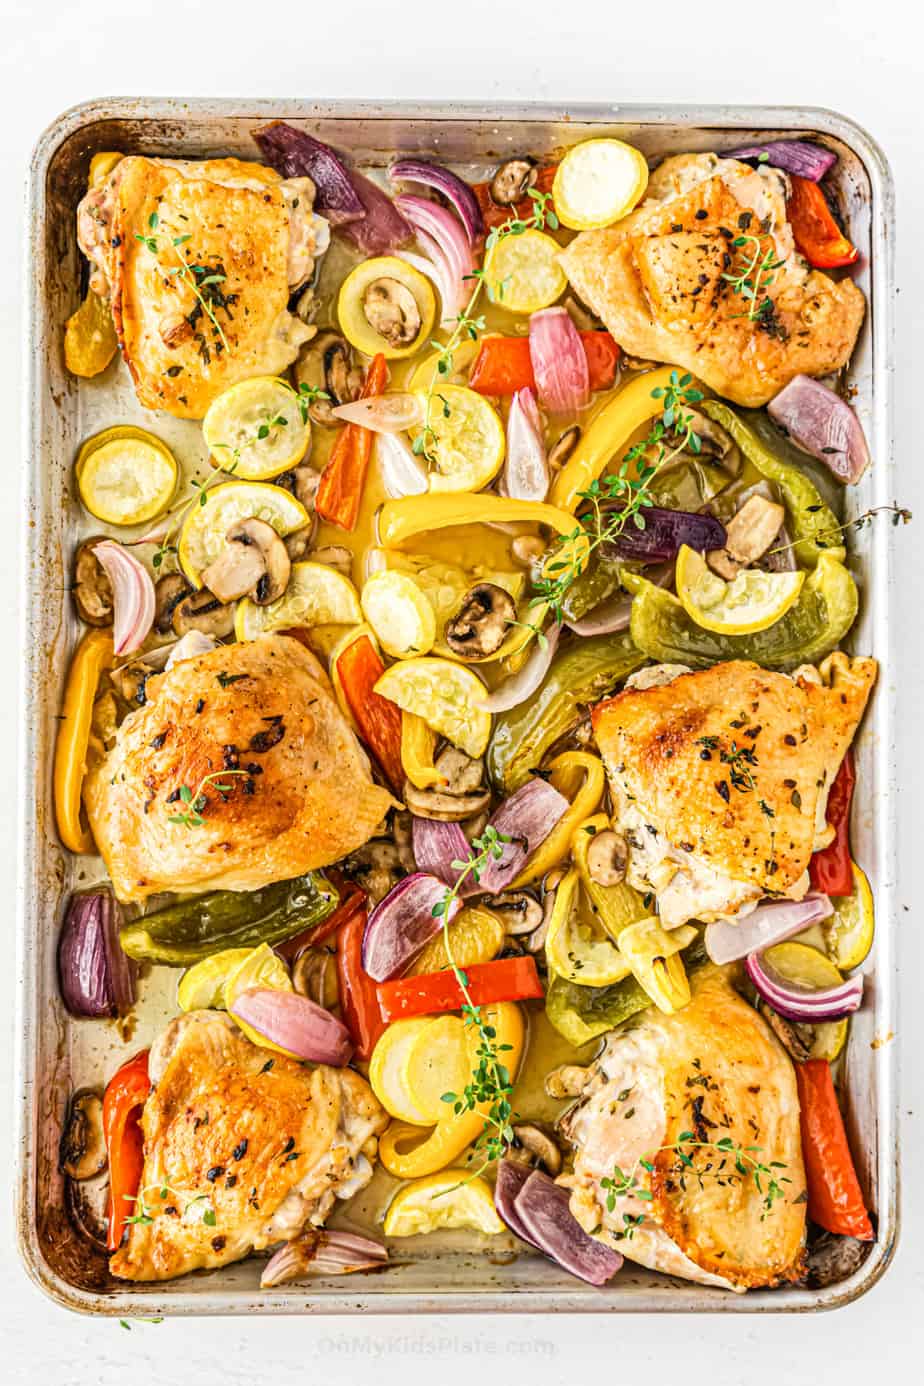 Golden brown chicken thighs with vegetables on a baking sheet.